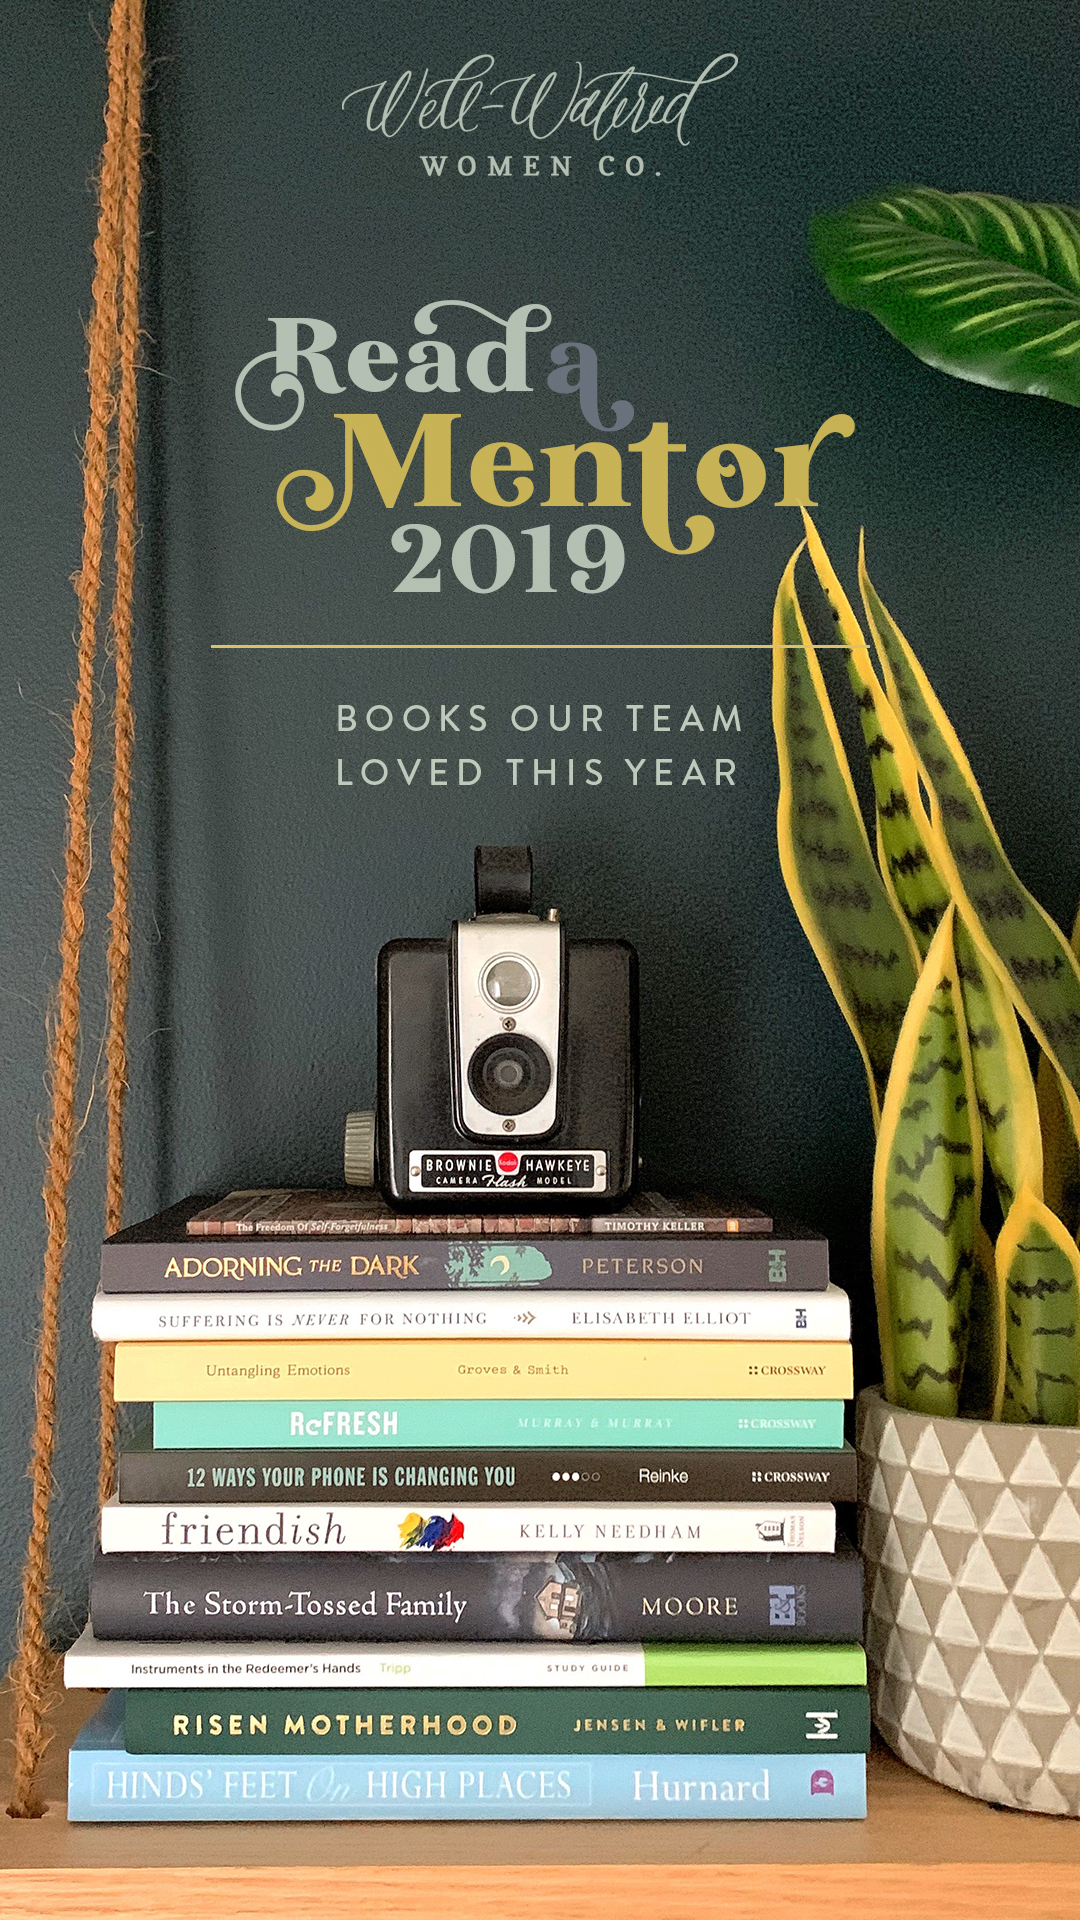 Well-Watered Women Blog | Read a Mentor 2019 | Books we loved reading this year.